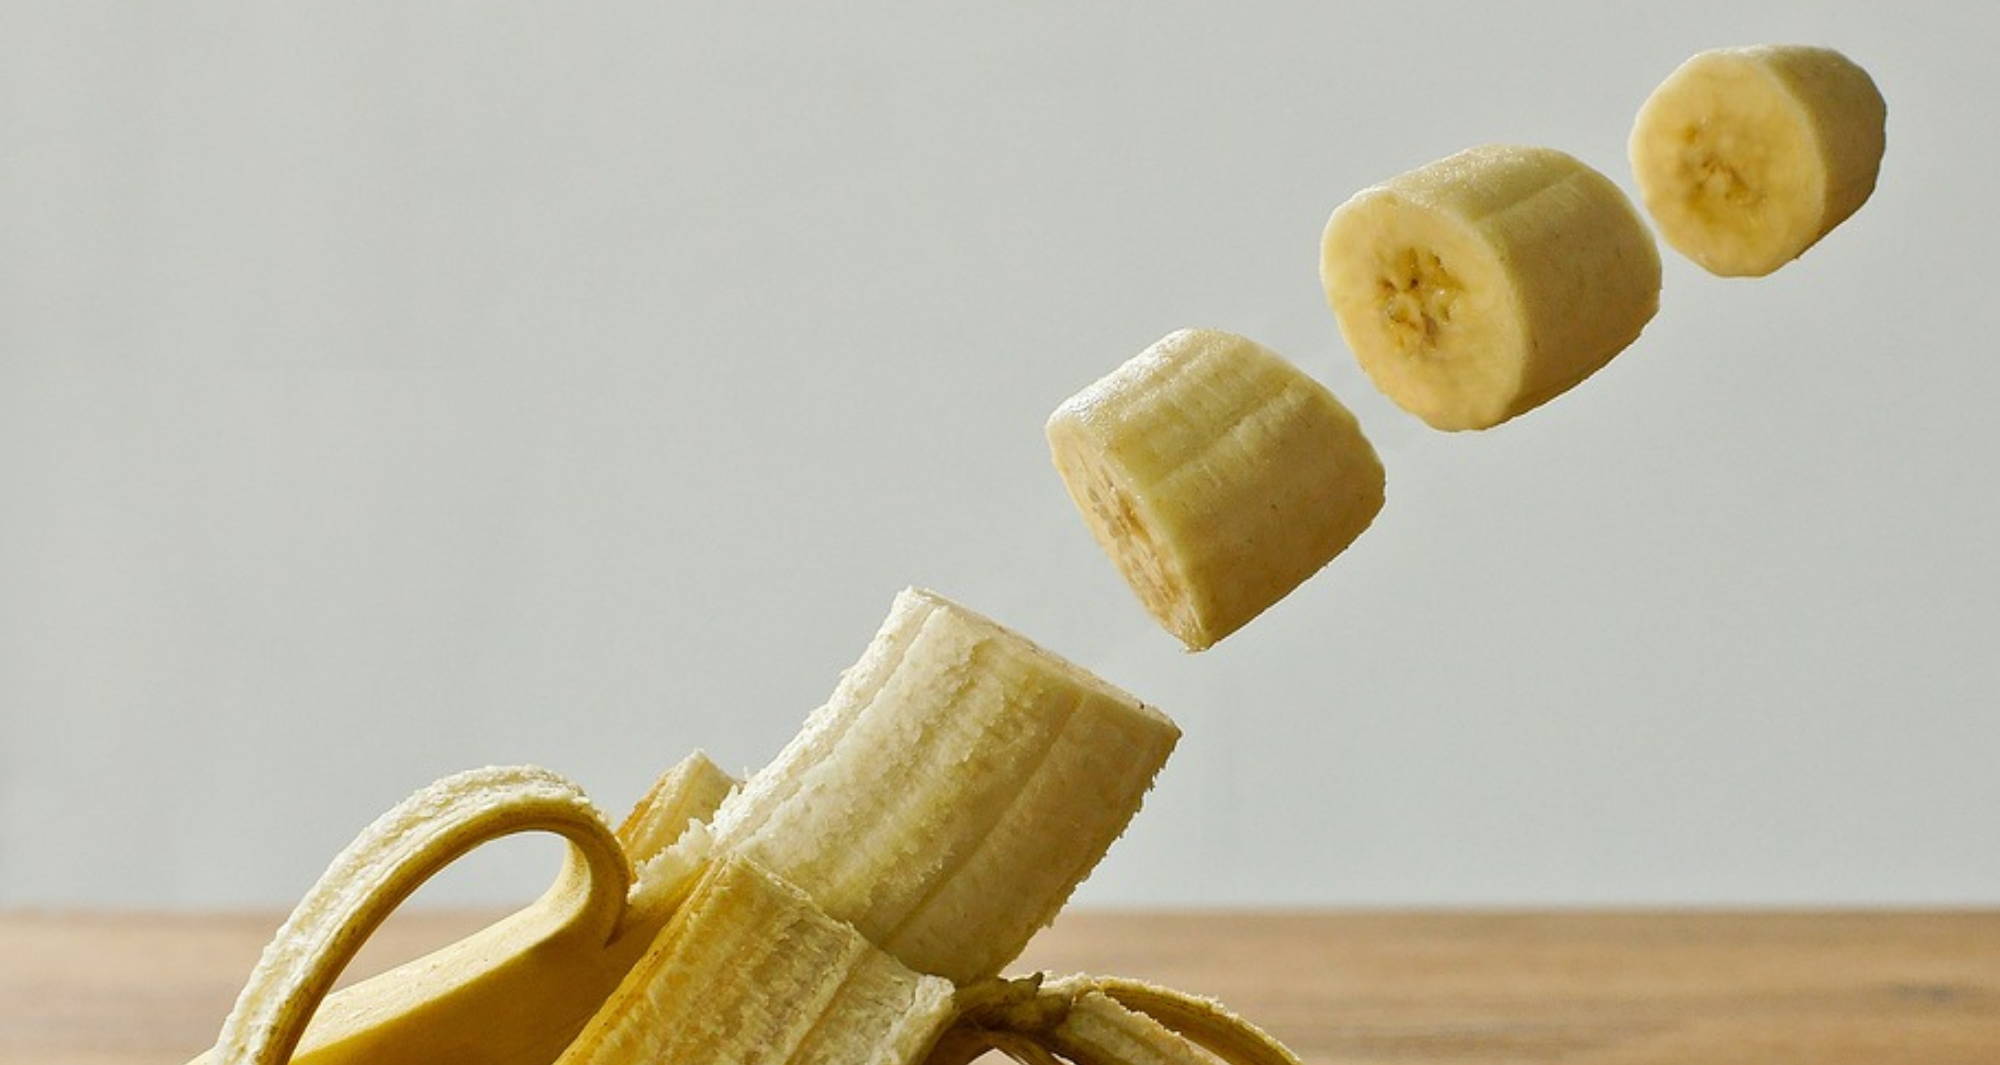  a banana with three cut pieces suspended in the air above